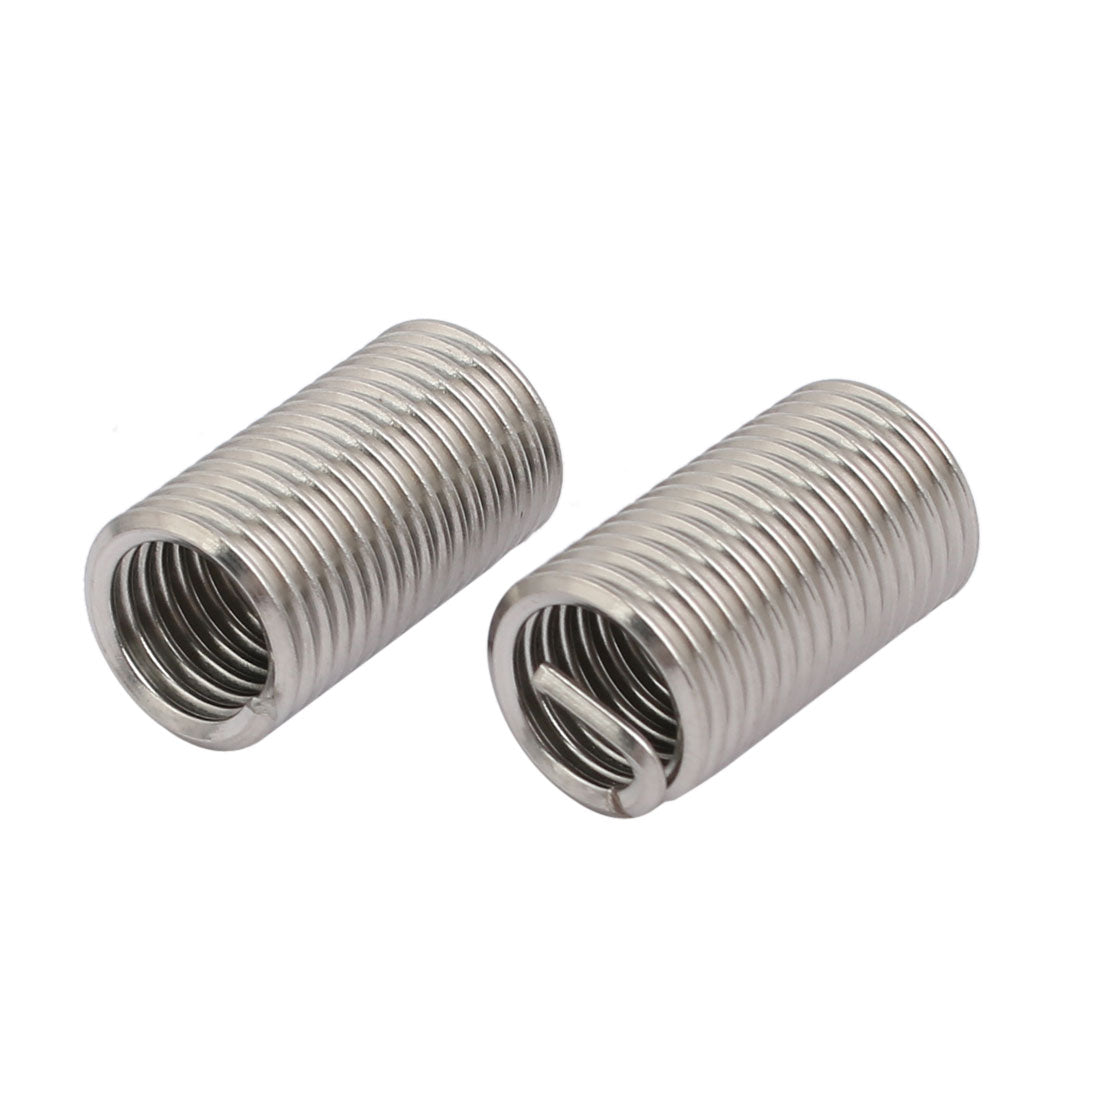 uxcell Uxcell M10x1.5mmx30mm 304 Stainless Steel Helical Coil Wire Thread Insert 12pcs